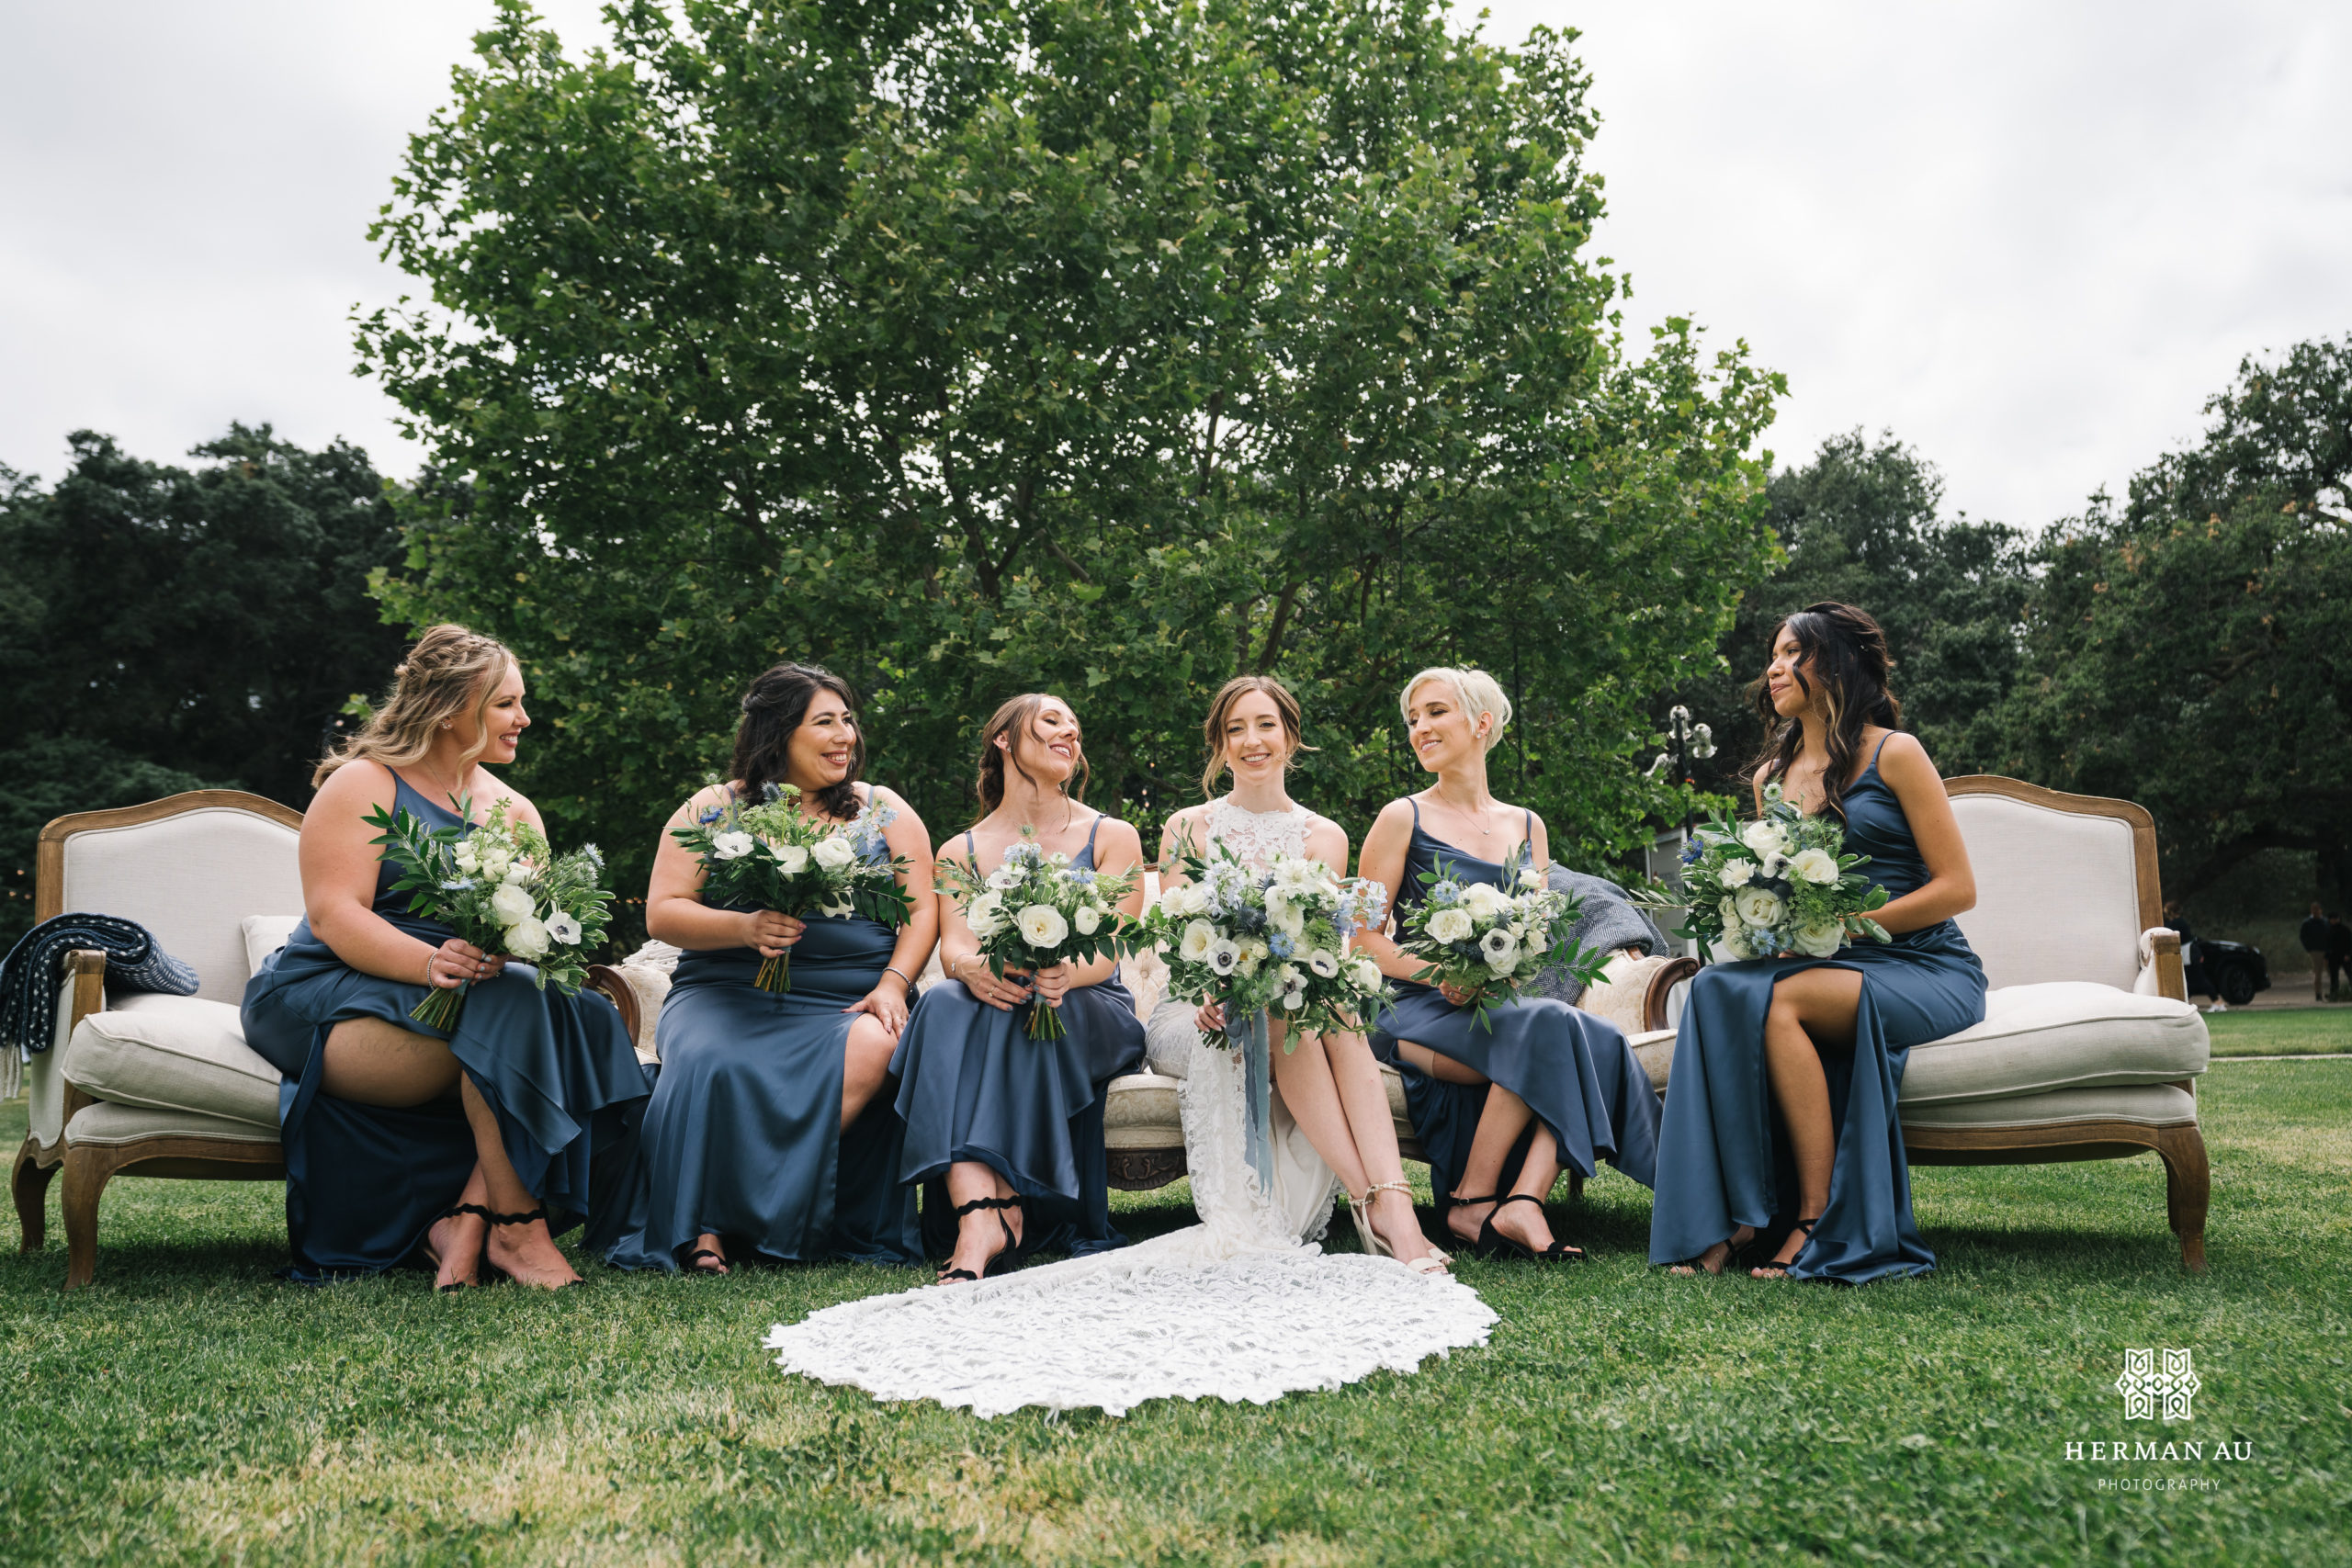  bride in high neckline lace wedding dress and white and blue bridal bouquet sits with bridesmaids in dark blue satin dresses on outdoor couch